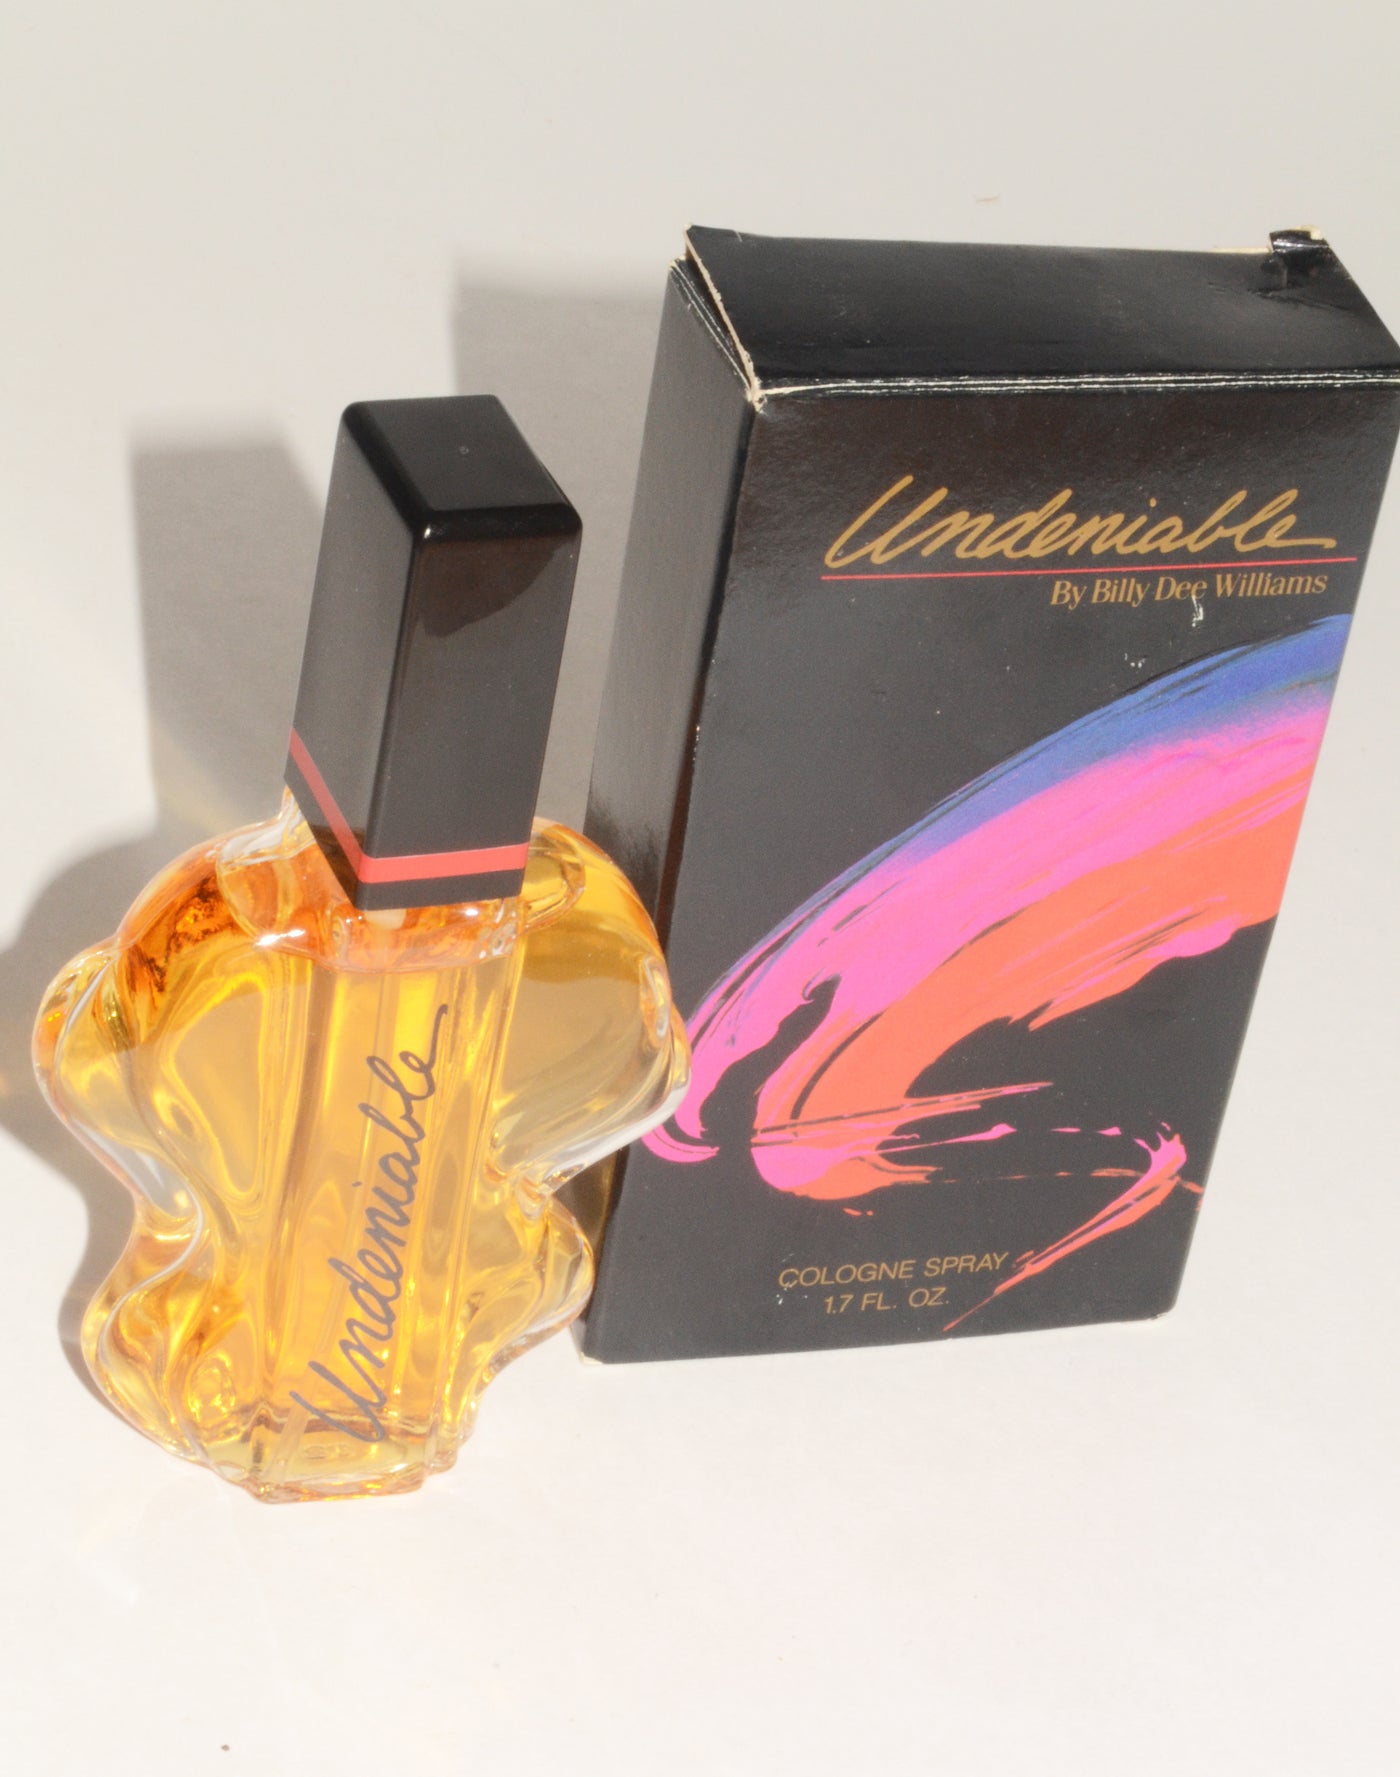  Vintage Undeniable Cologne By Billy Dee Williams - Avon